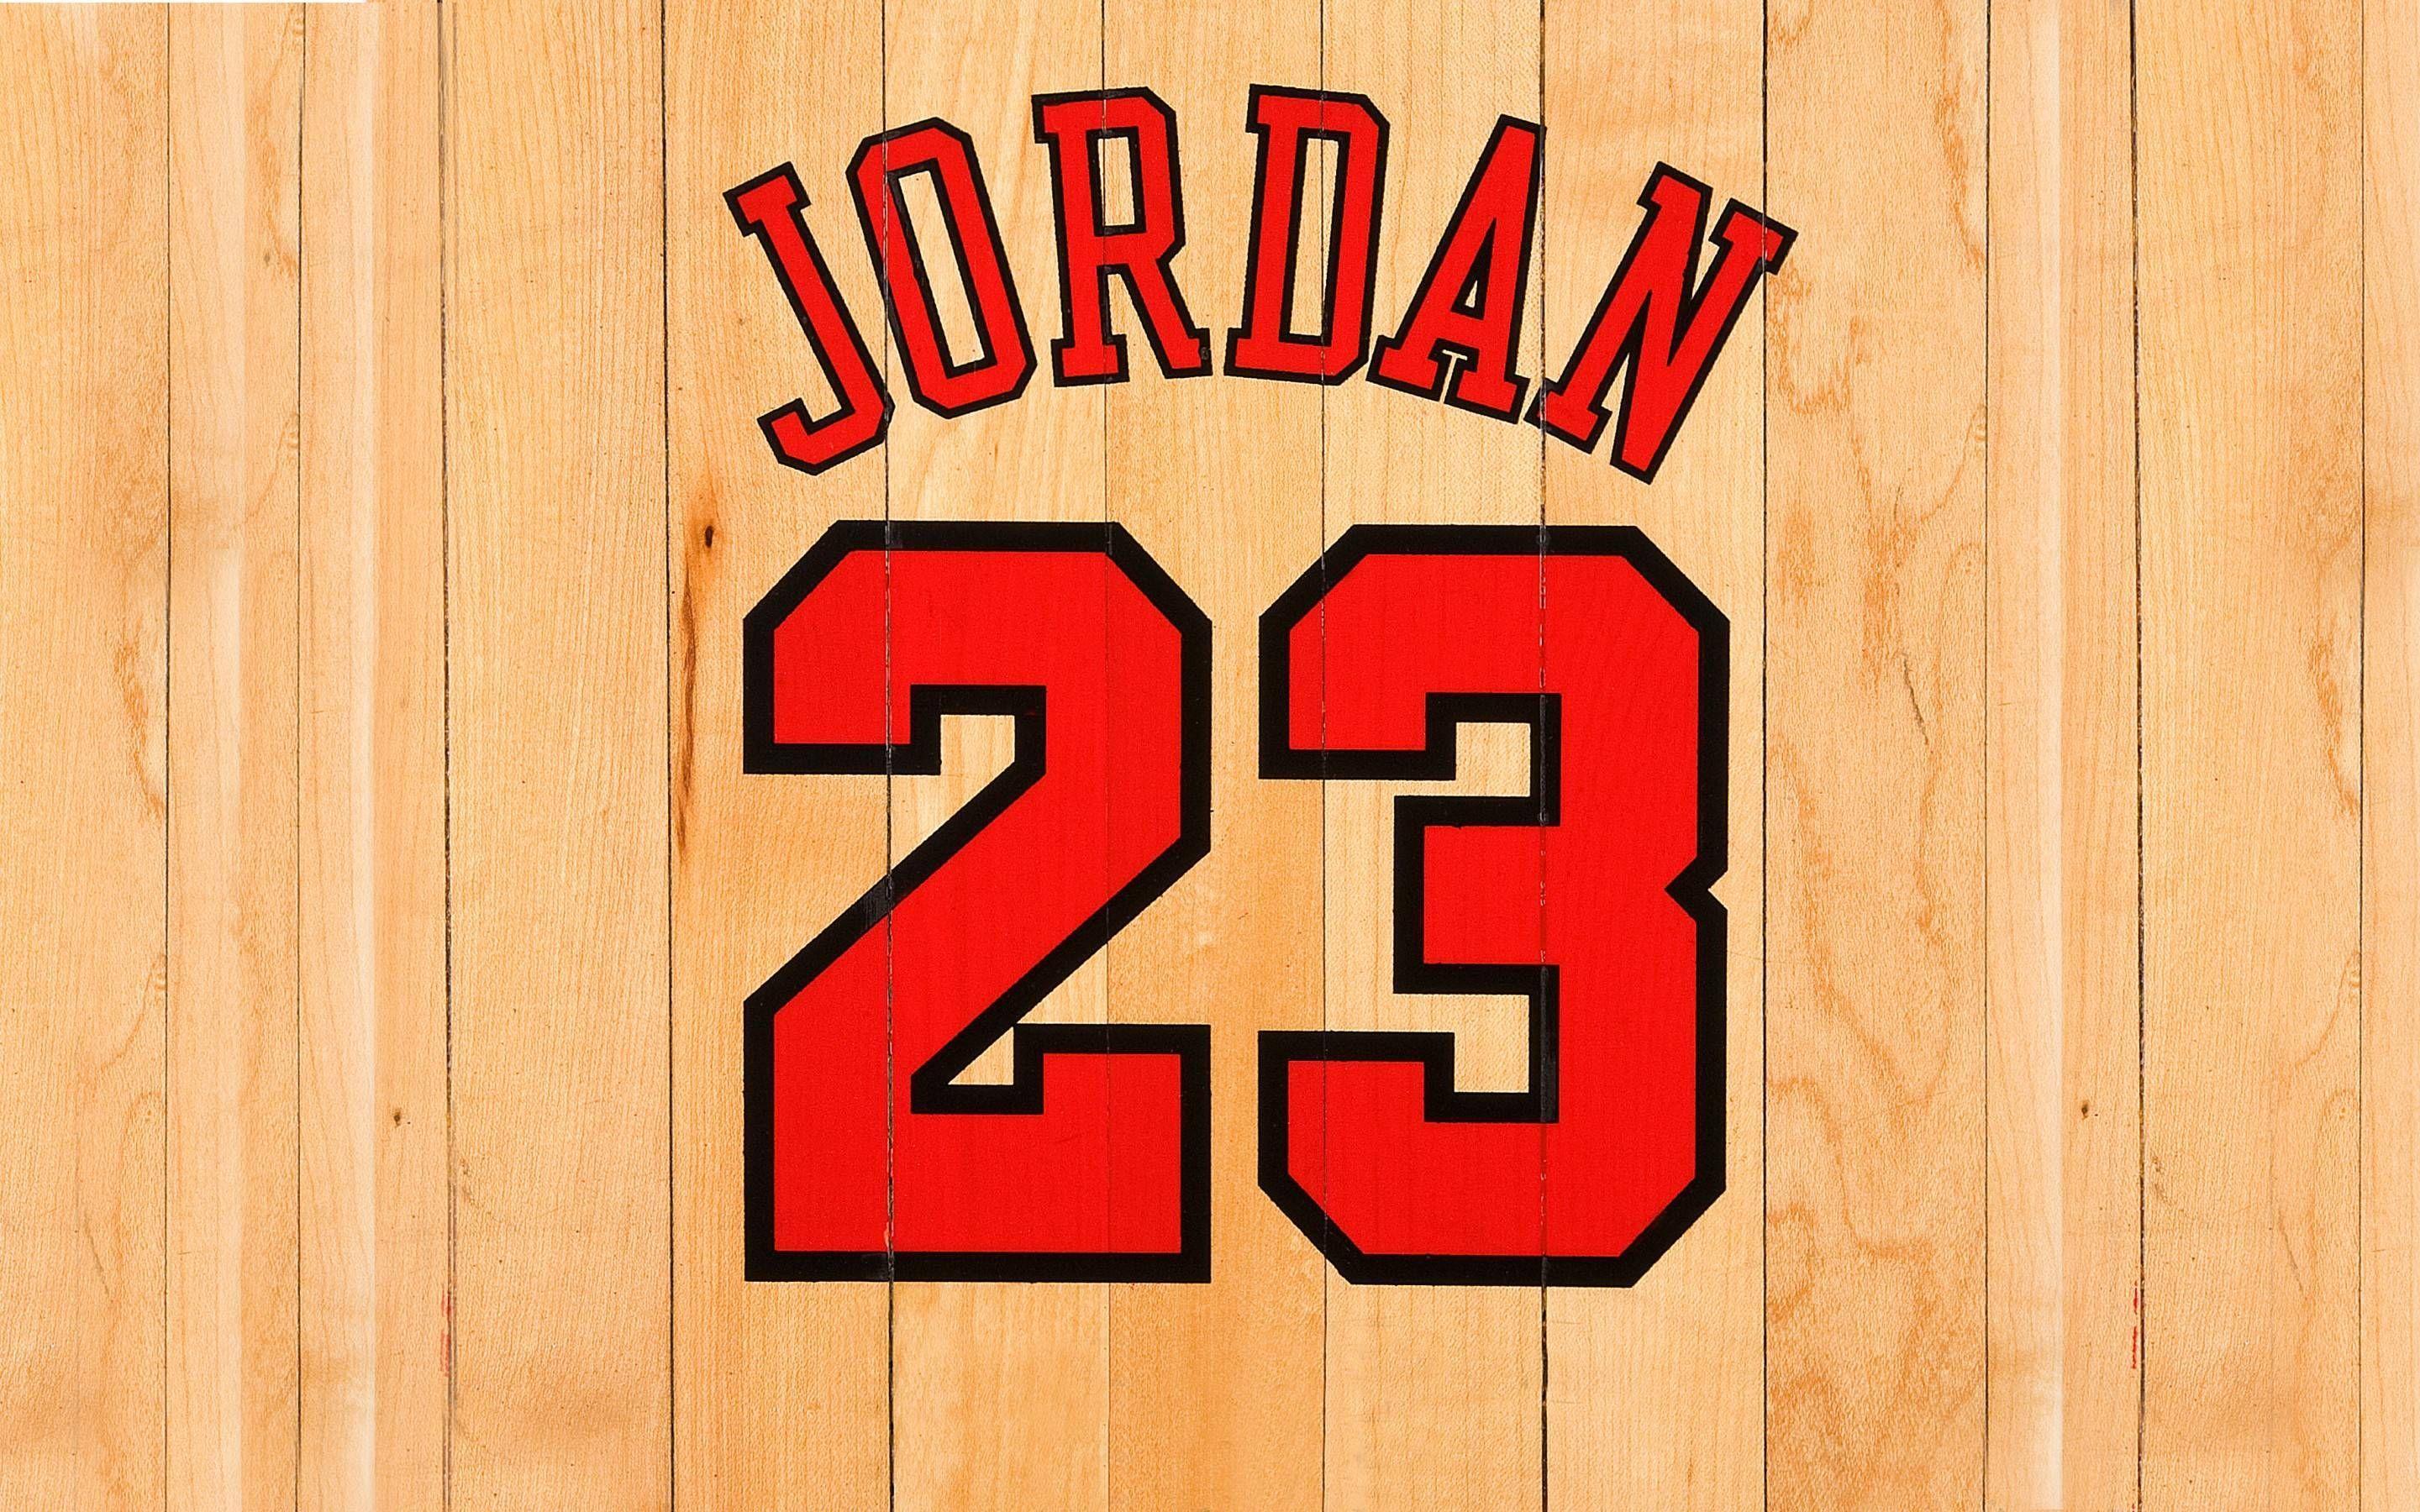 jordans with the number 23 on them